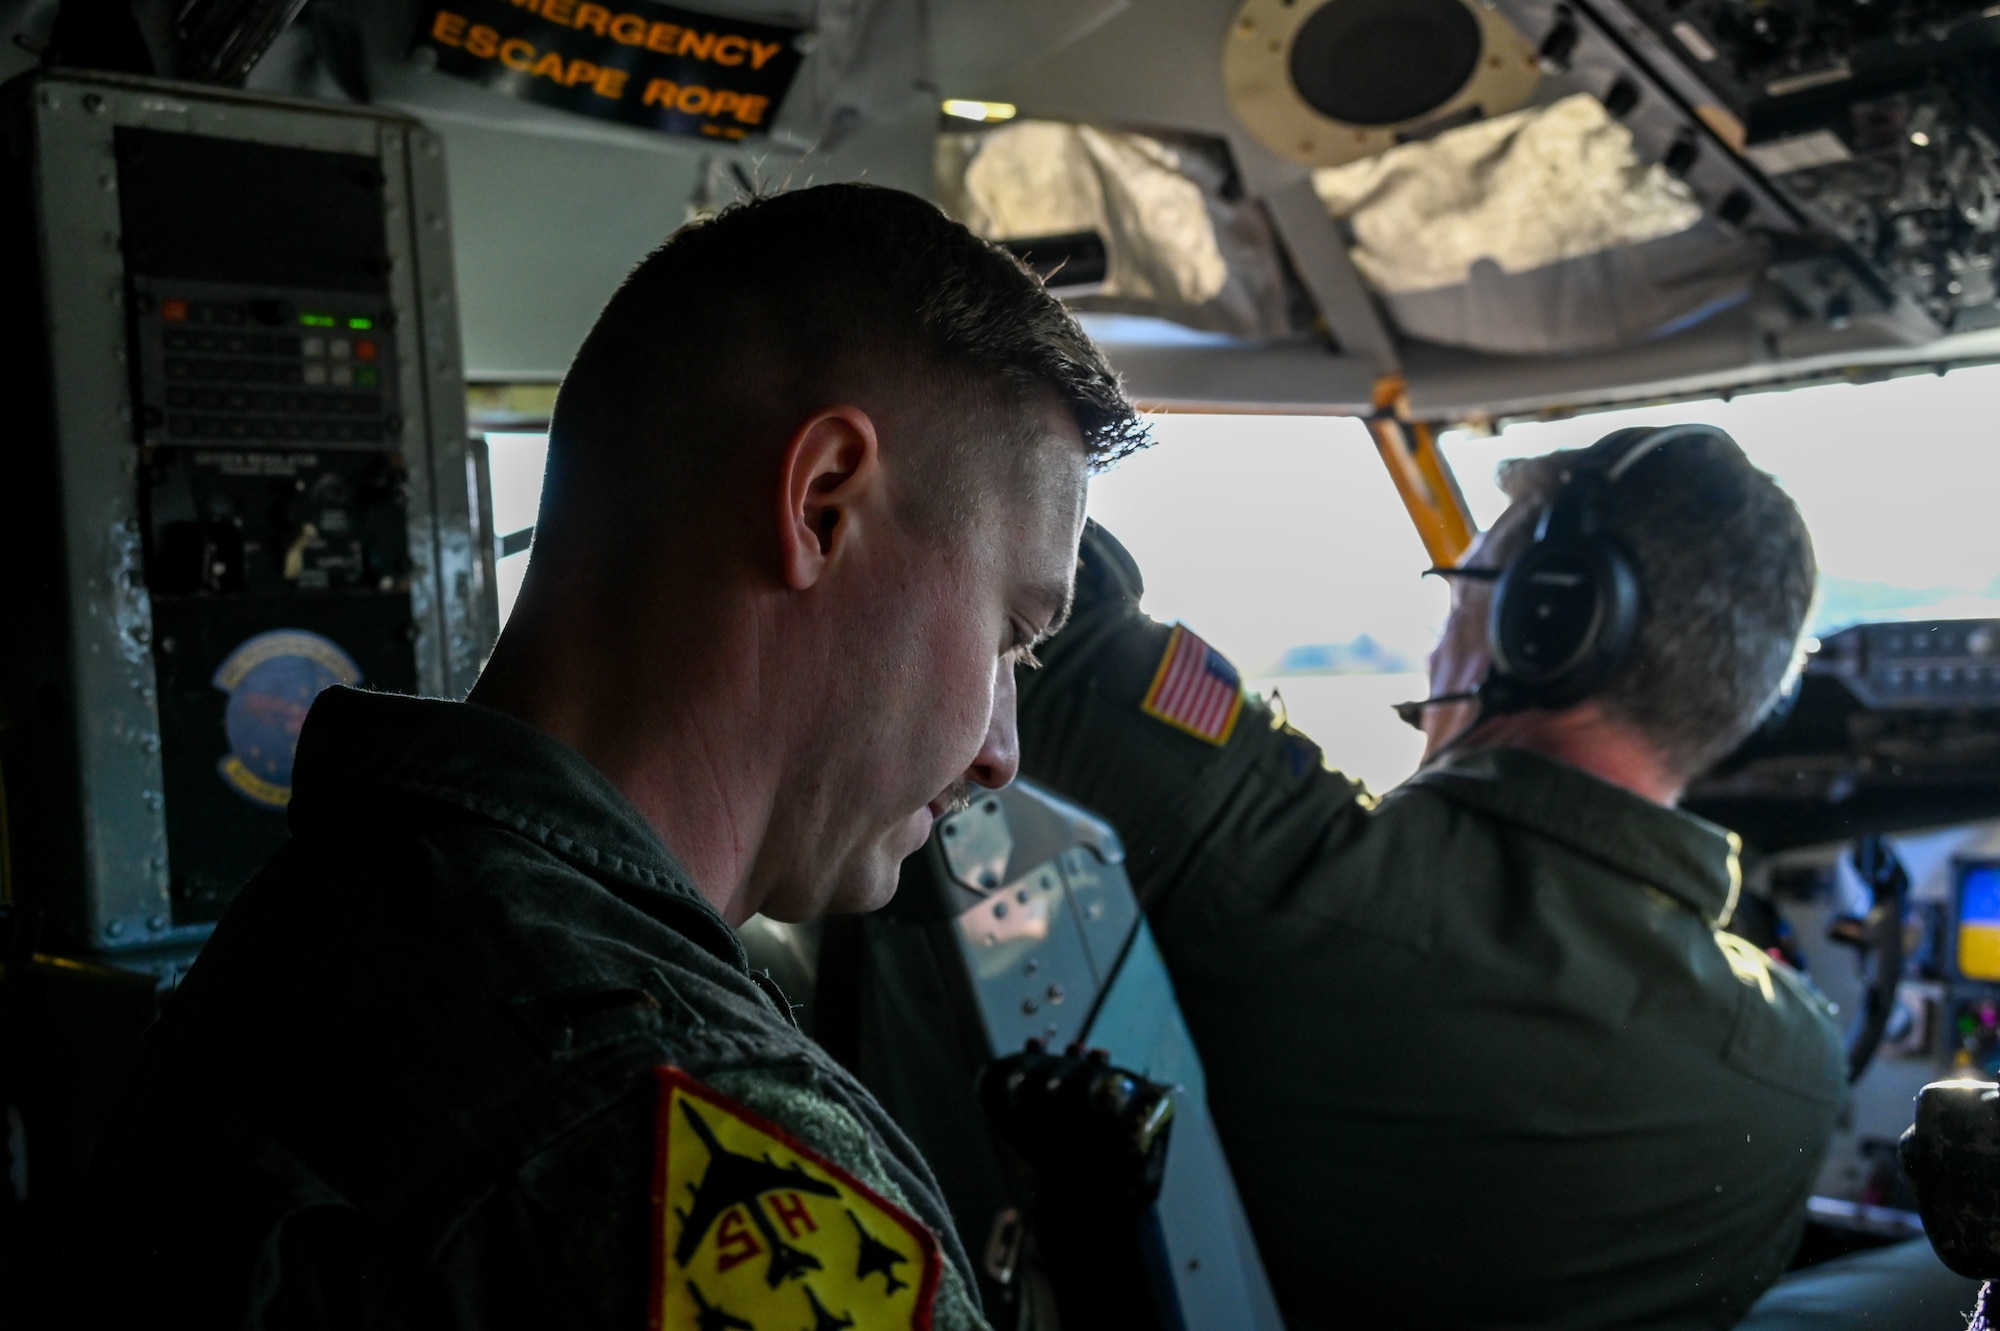 Col. Ken Humphrey, 507th Operations group commander, is joined by his son, 2nd Lt. Kennedy Humphrey, 71st Student Squadron student pilot, during his final flight as an 507th Air Refueling Wing Okie Sept. 29, 2022, Tinker Air Force Base, Oklahoma. His son will become a KC-135 pilot with the Okies at the conclusion of his training. Kennedy will be the third generation in his family to become an Okie. (U.S. Air Force photo by 2nd Lt. Mary Begy)